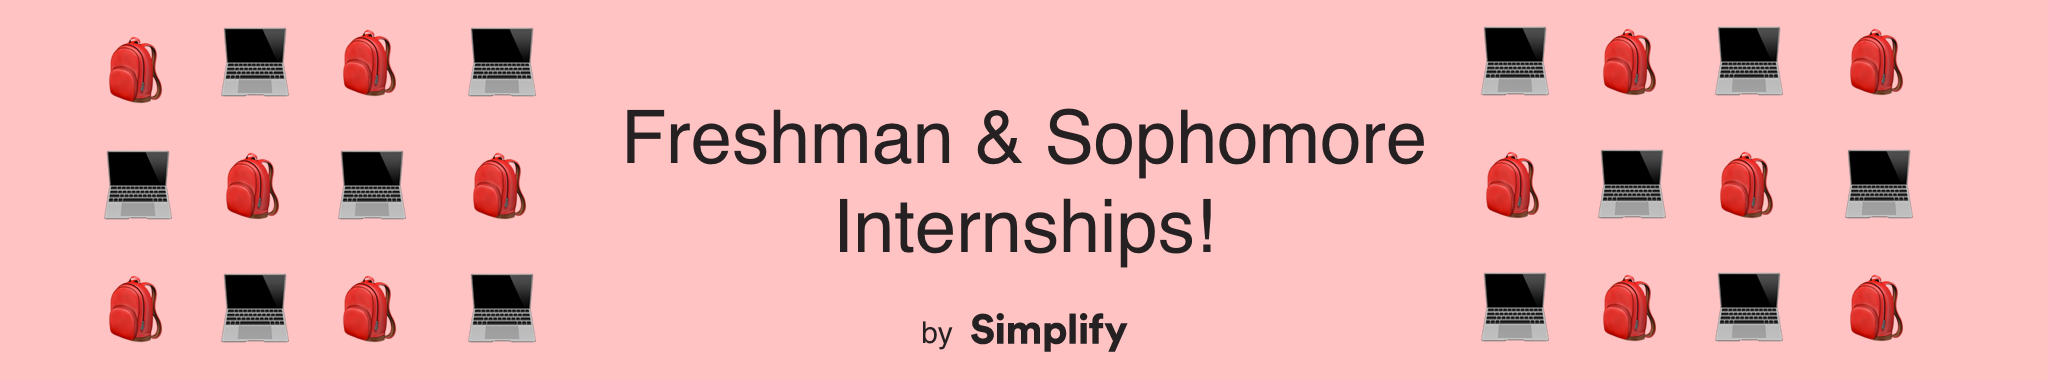 text that says “Freshman & Sophomore Internships! by Simplify” surrounded by backpack and laptop emojis